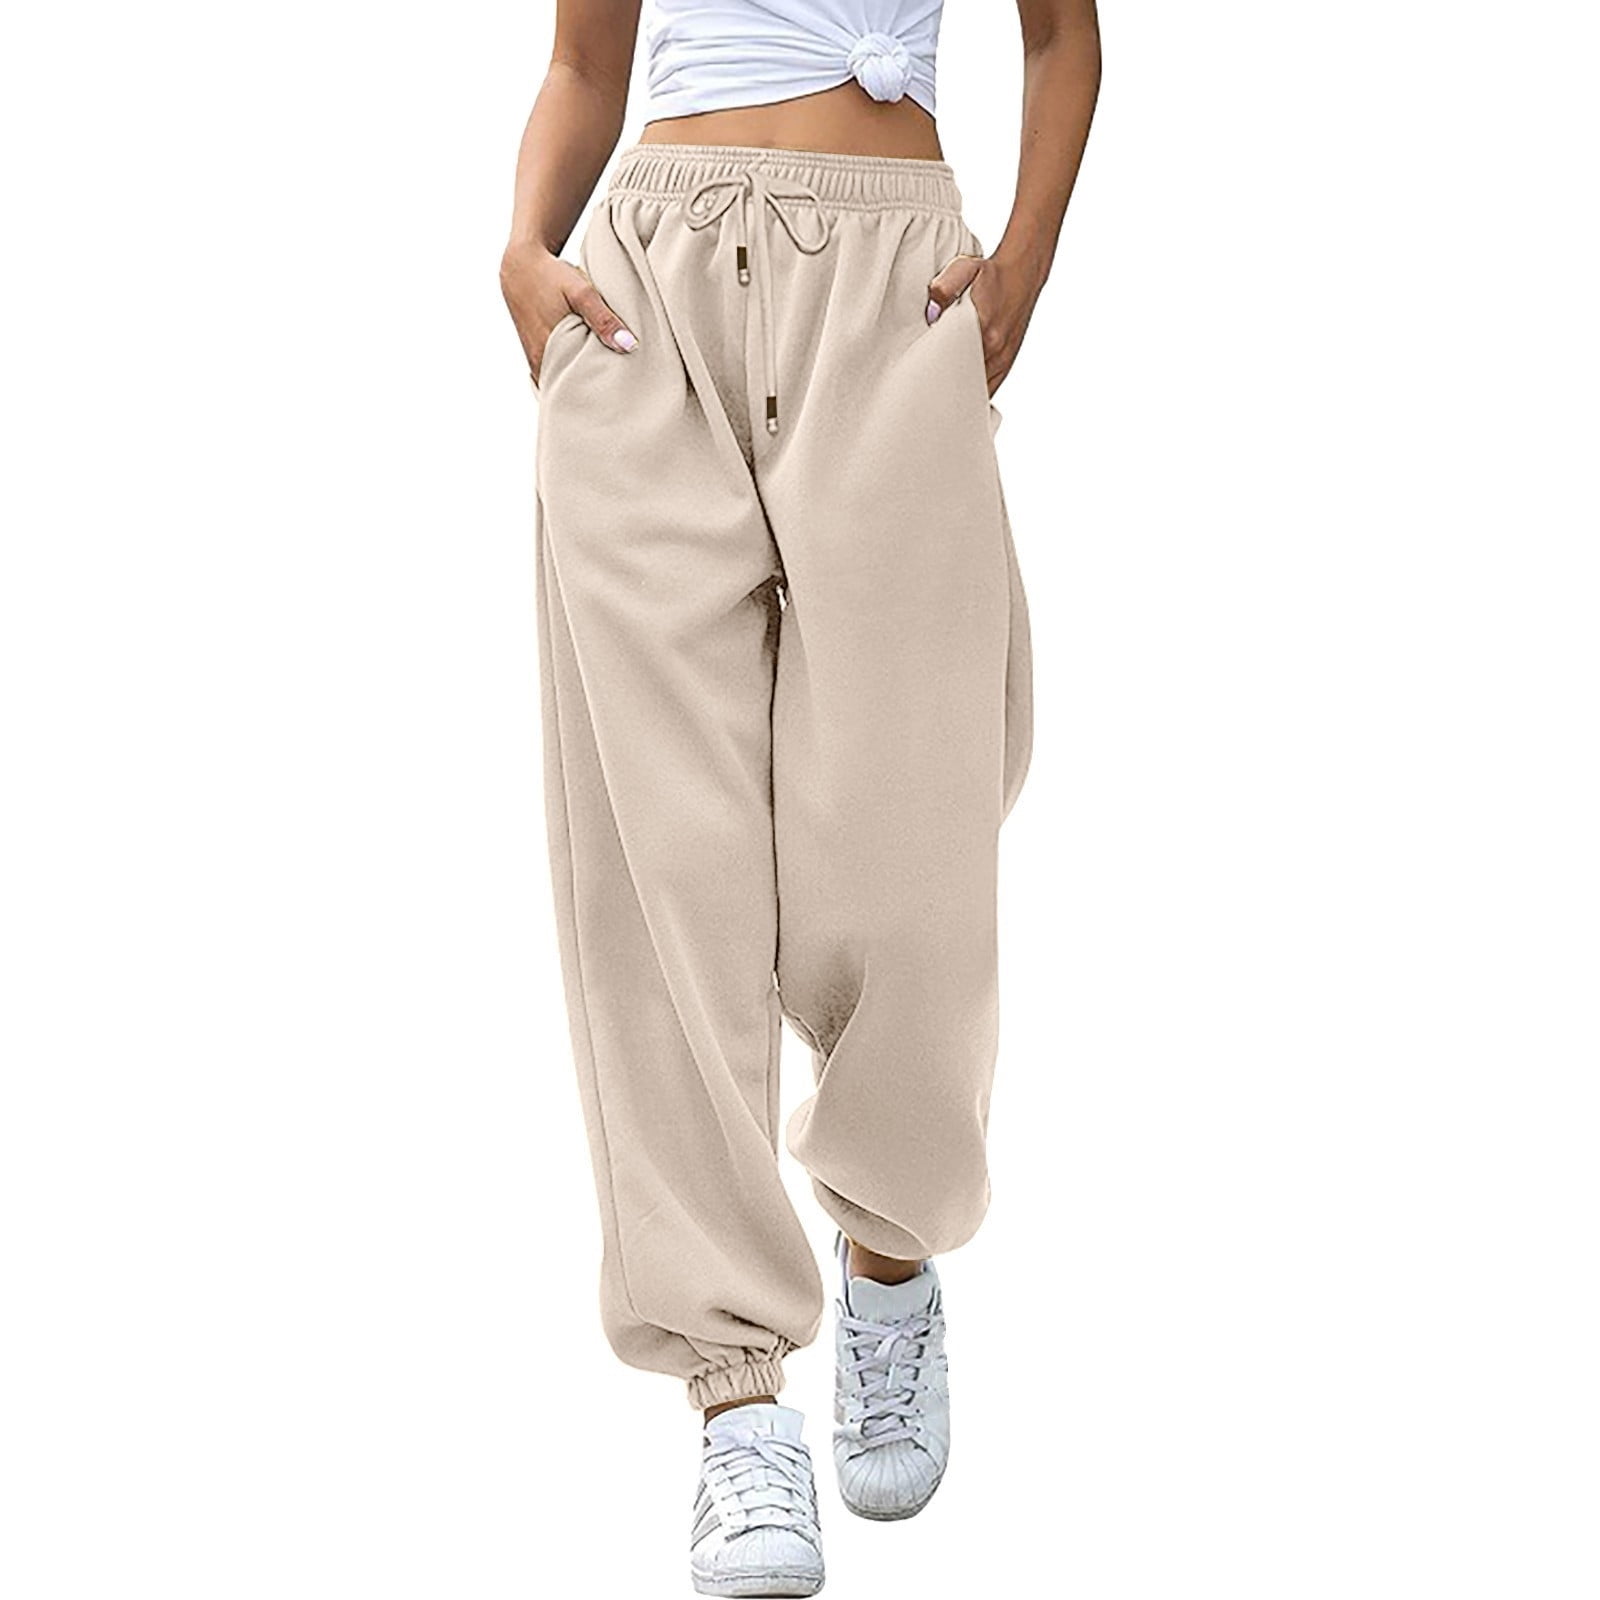 TOWED22 Parachute Pants For Women,Wide Leg Sweatpants for Women Loose  Drawstring Yoga Pants with Pockets Baggy Cinch Bottom Workout Running  Joggers